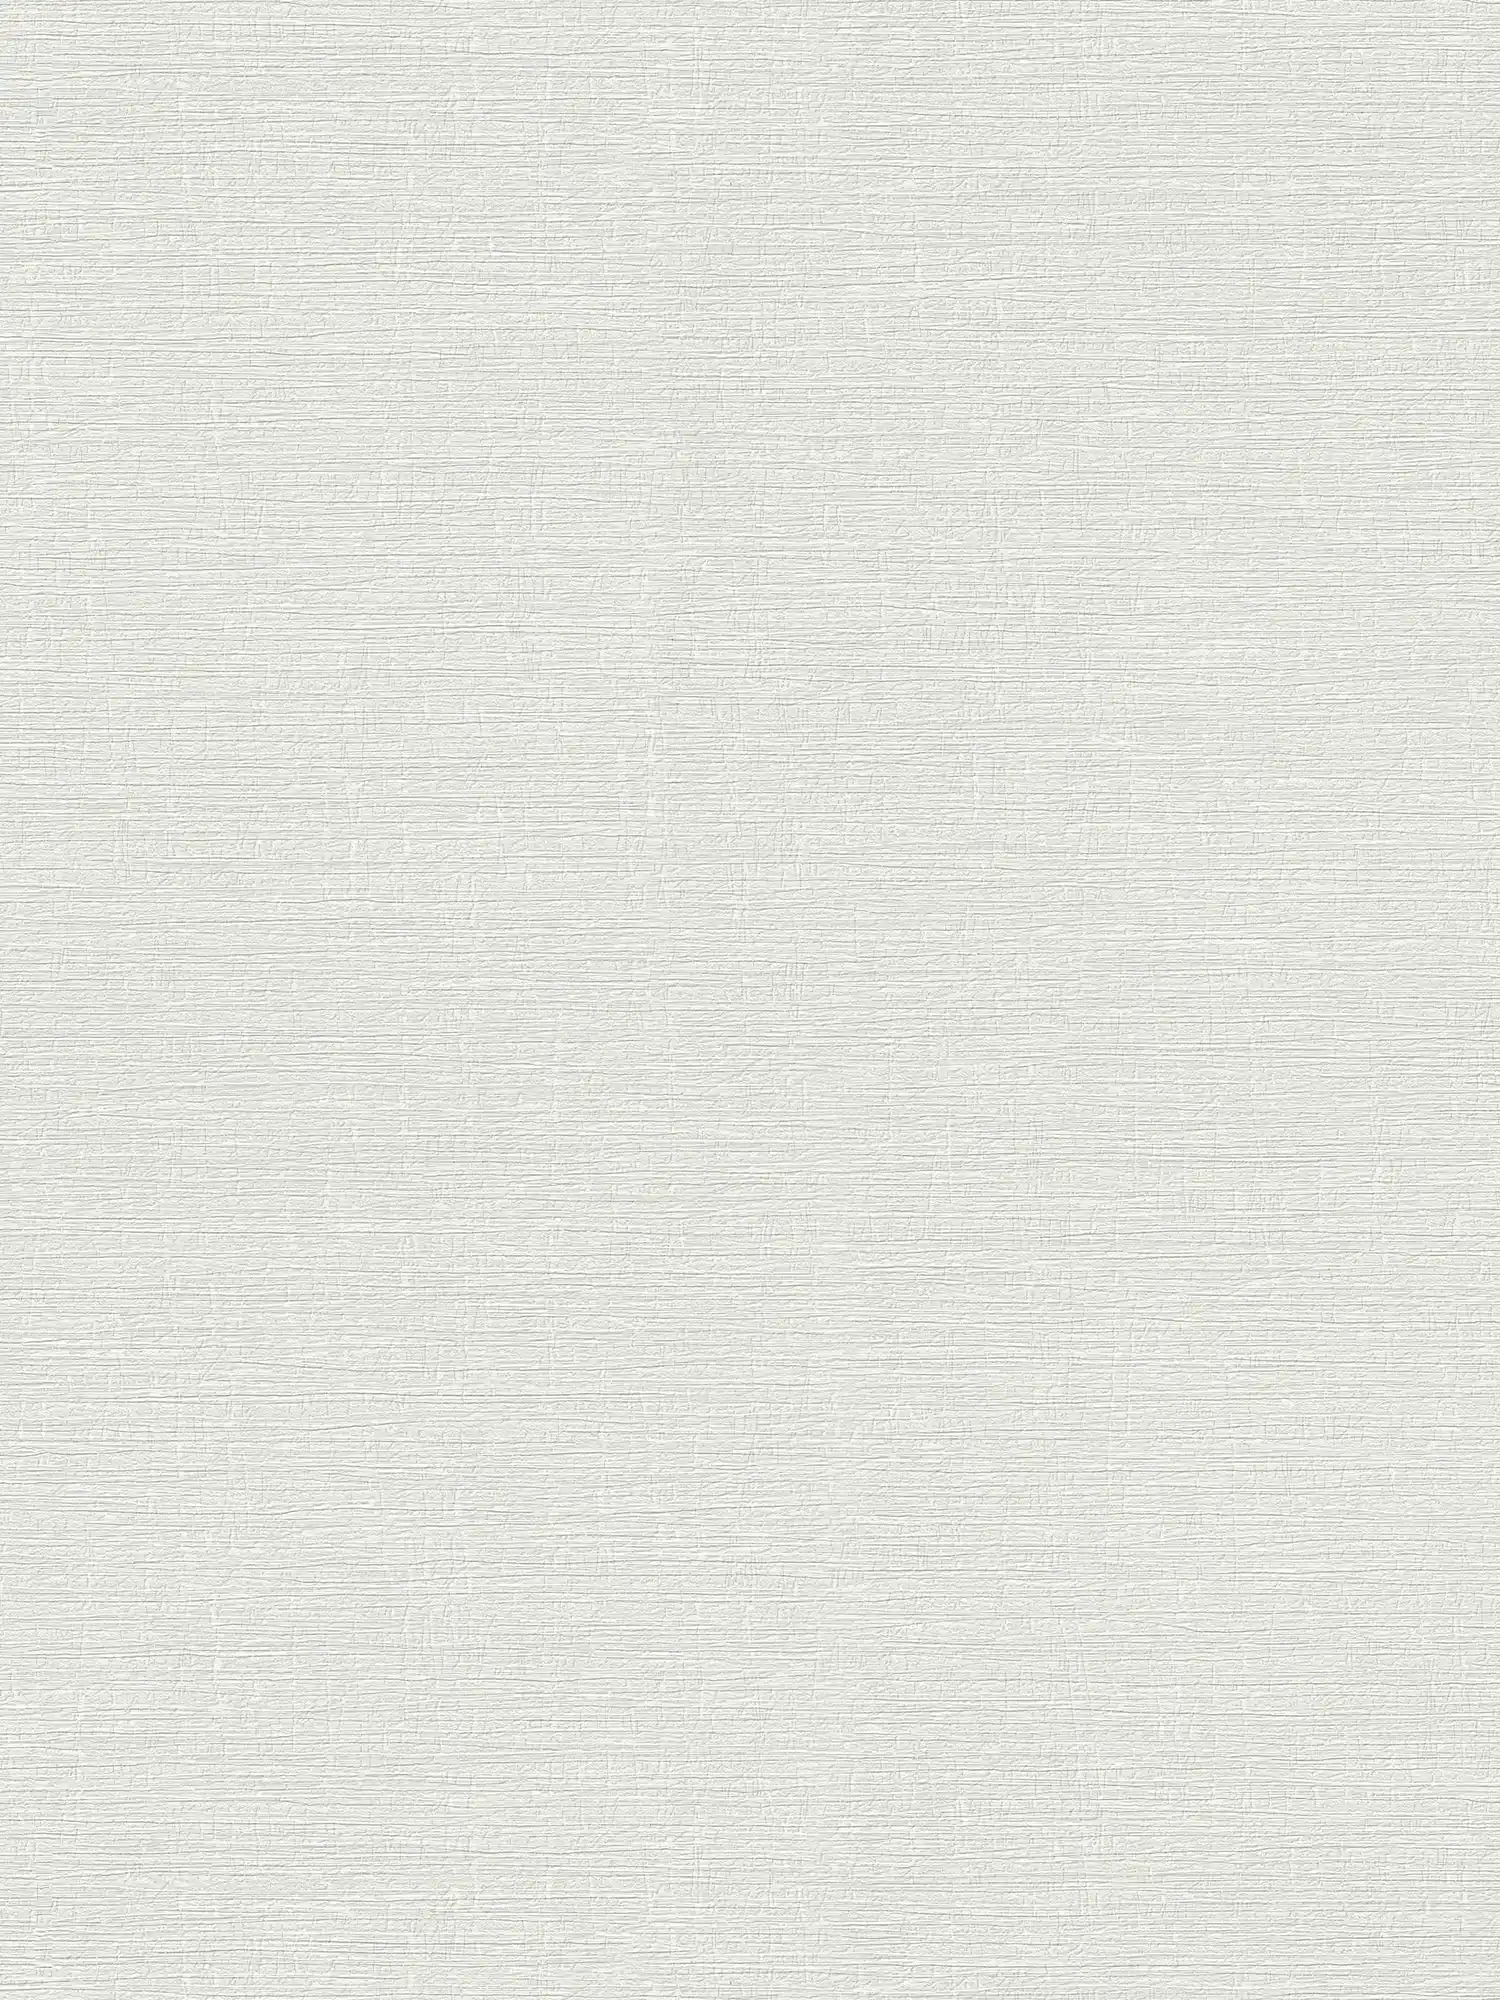 Simple plain wallpaper with a light texture - grey
